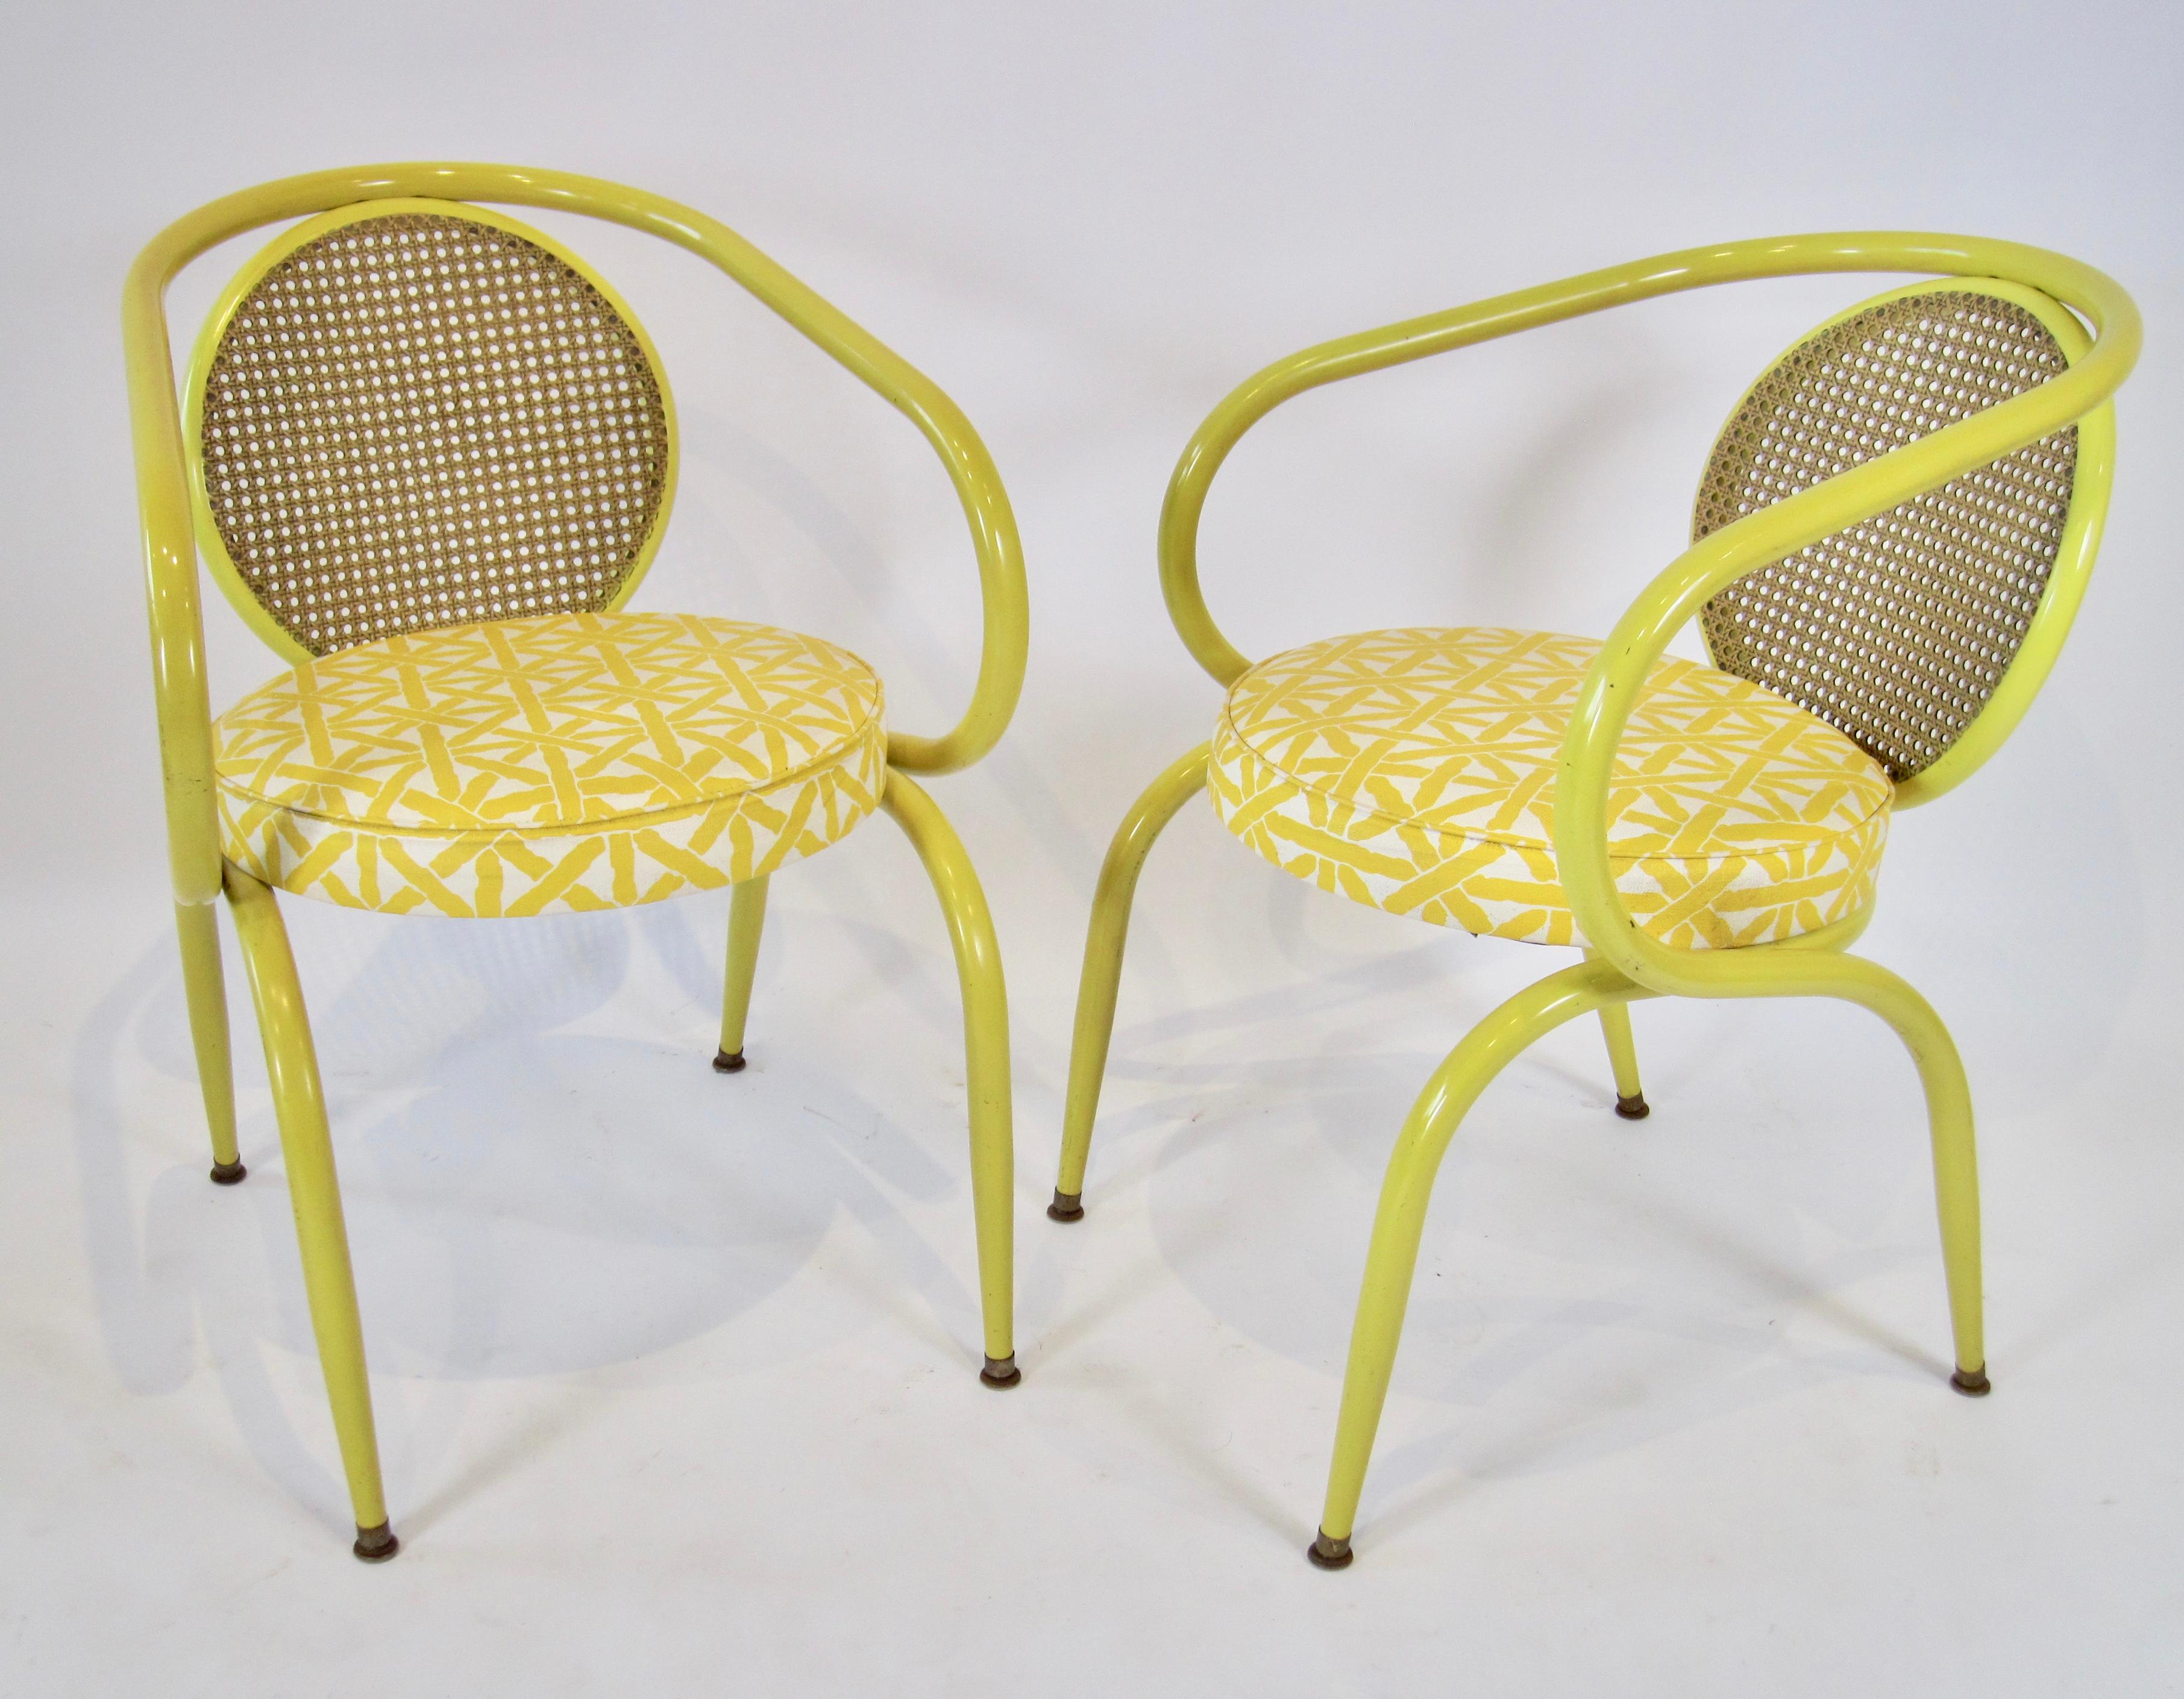 Rare pair of Howell decorator chairs with tubular steel frame, round graphic vinyl covered cushioned seat, and pressed fiberglass cane style back. 

Beginning as a foundry in 1867, the Howell Company produced fluting and sad irons in its Geneva,